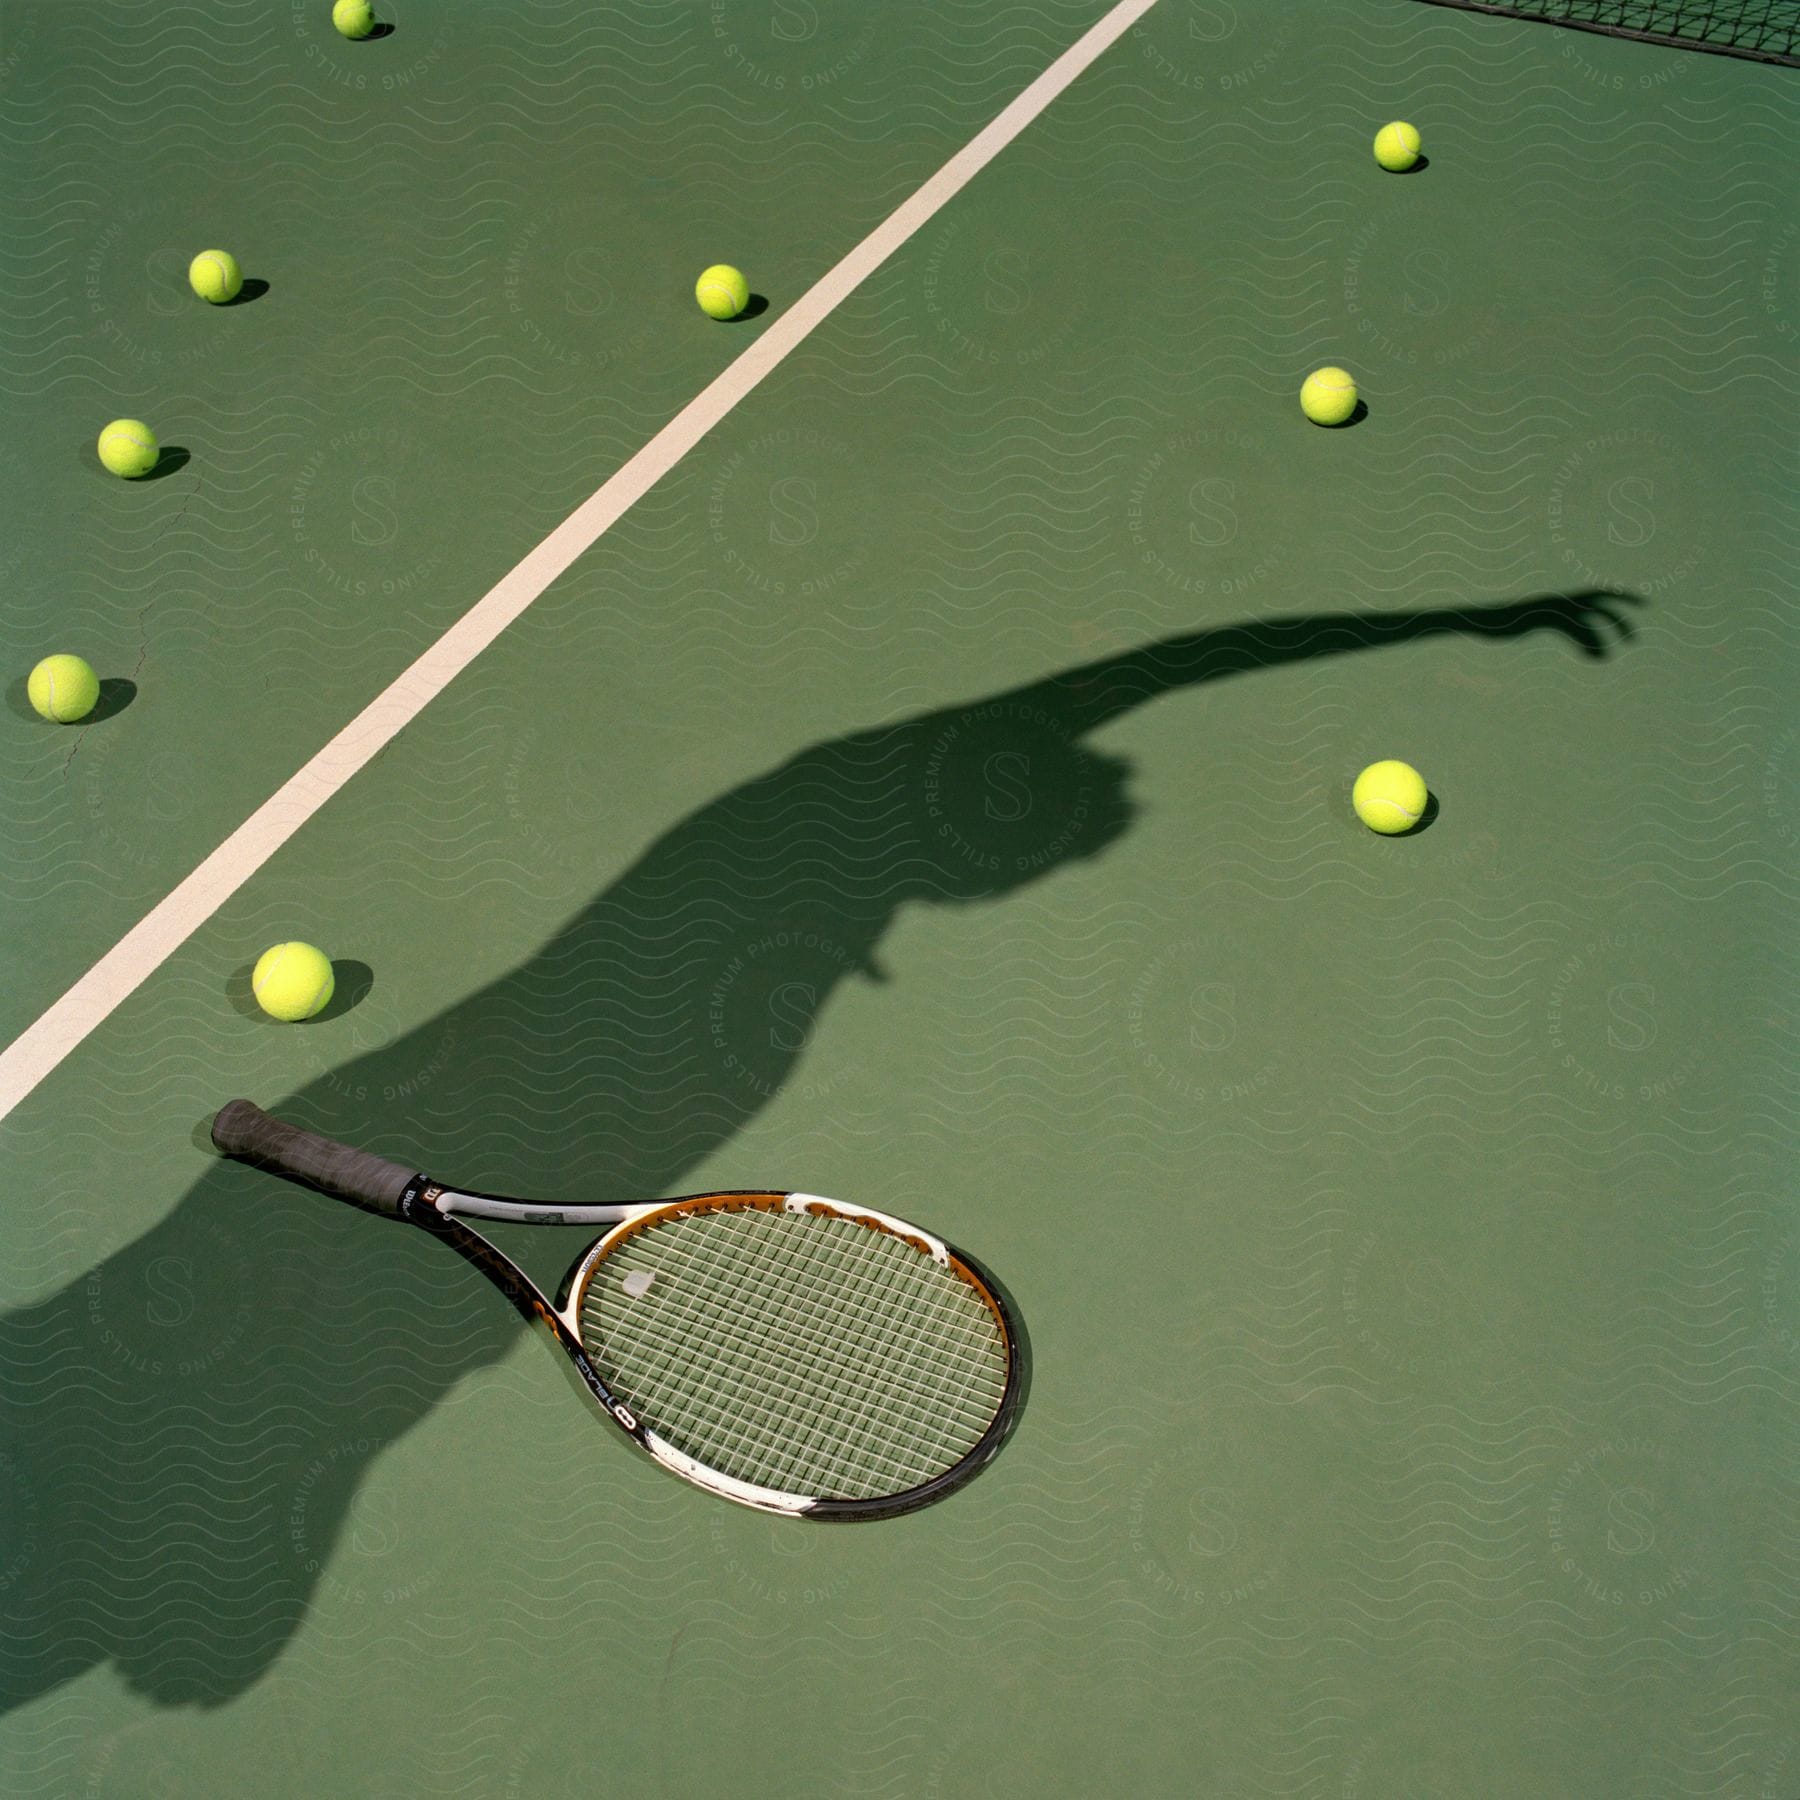 A tennis court with scattered balls a rack and the shadow of a player